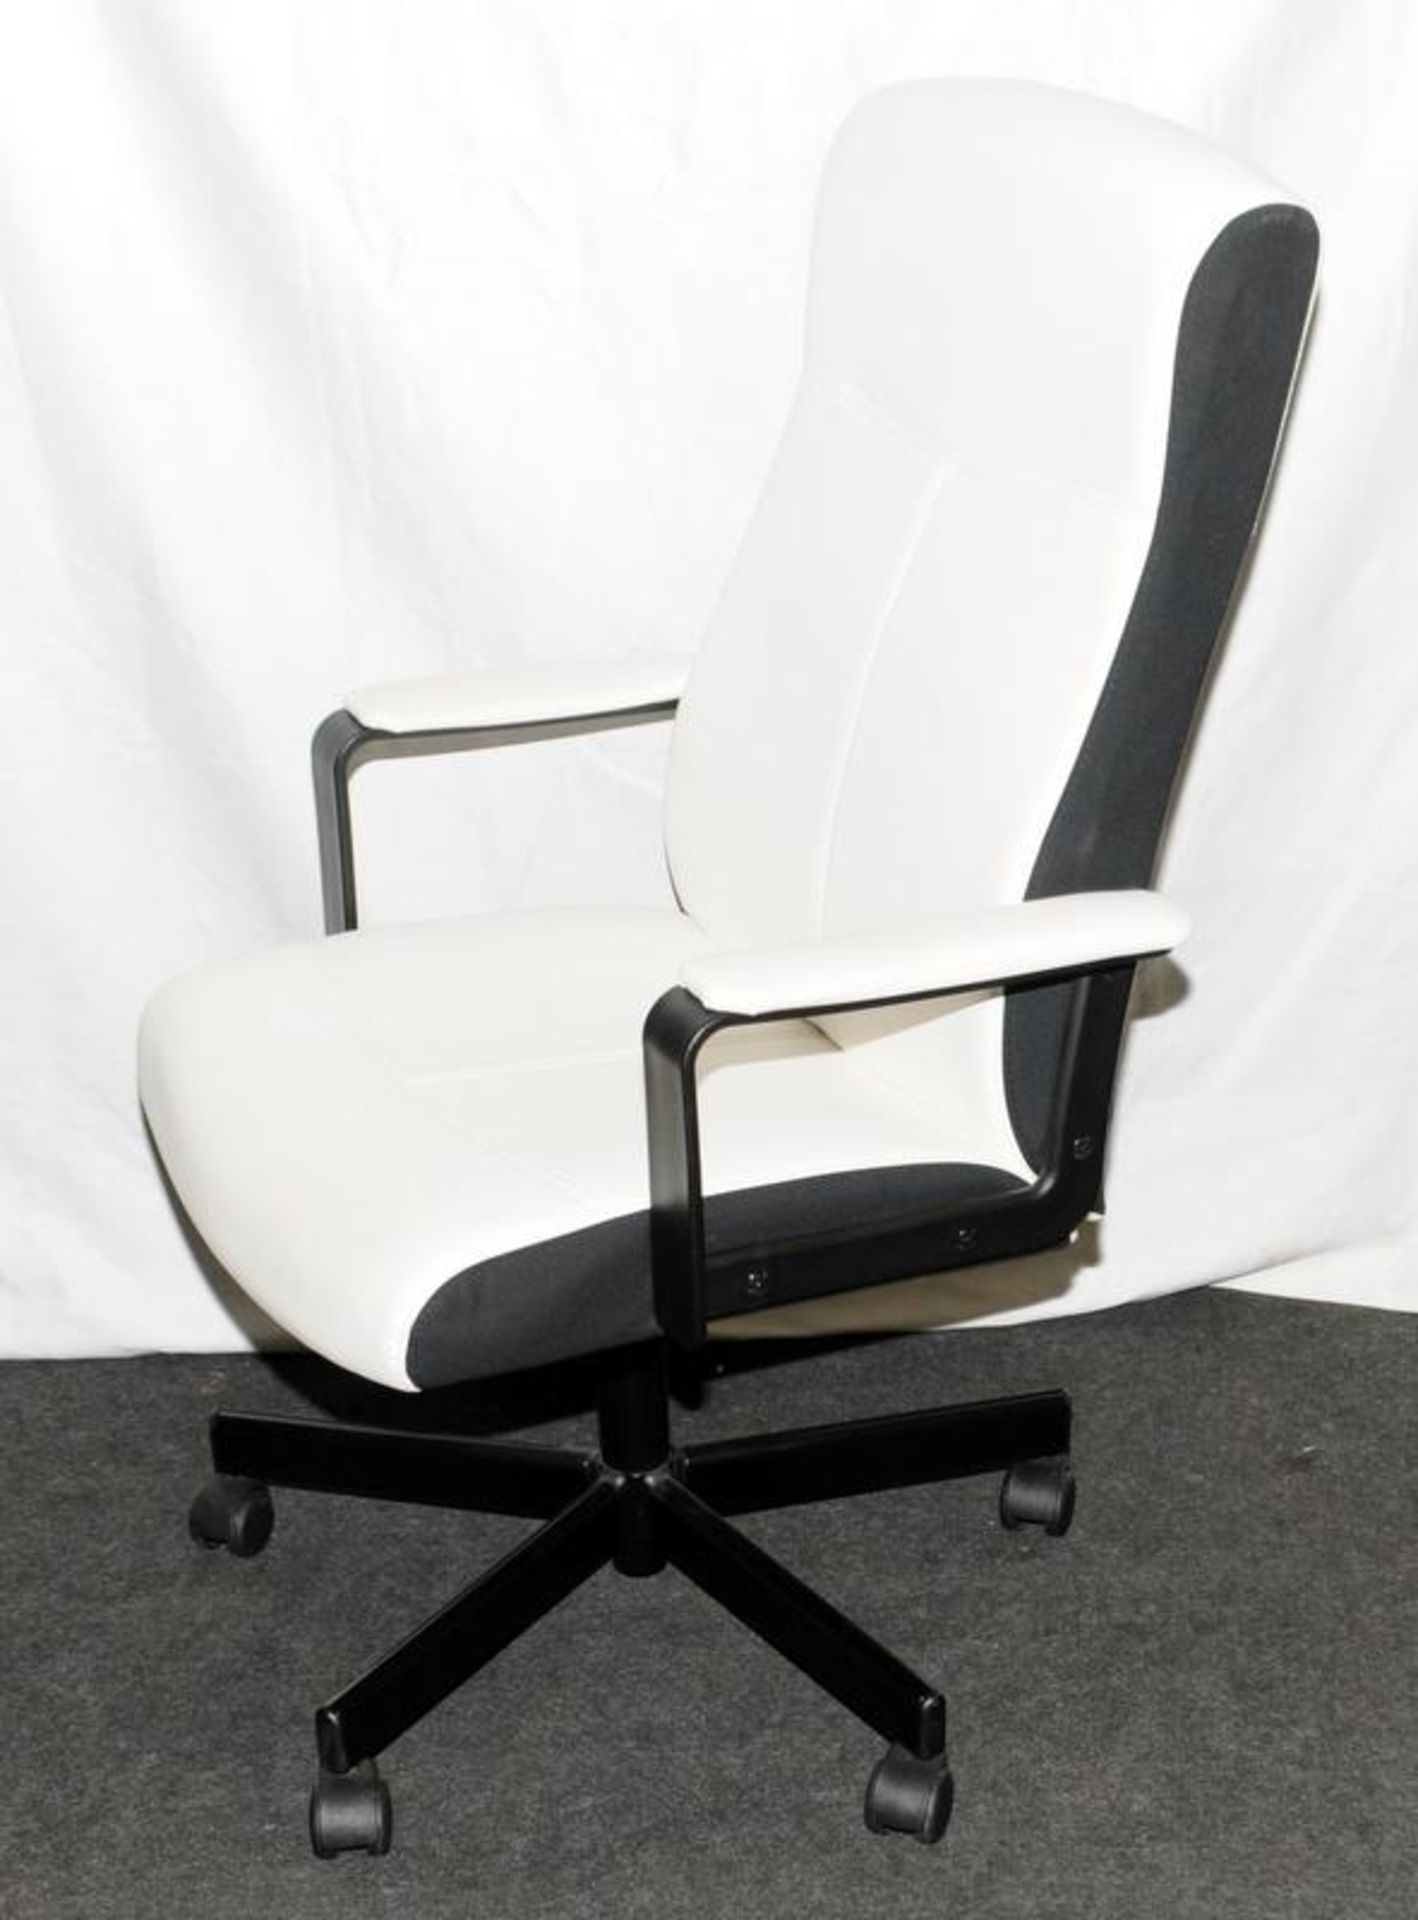 Office/desk chair in contemporary black/white colour - Image 2 of 3